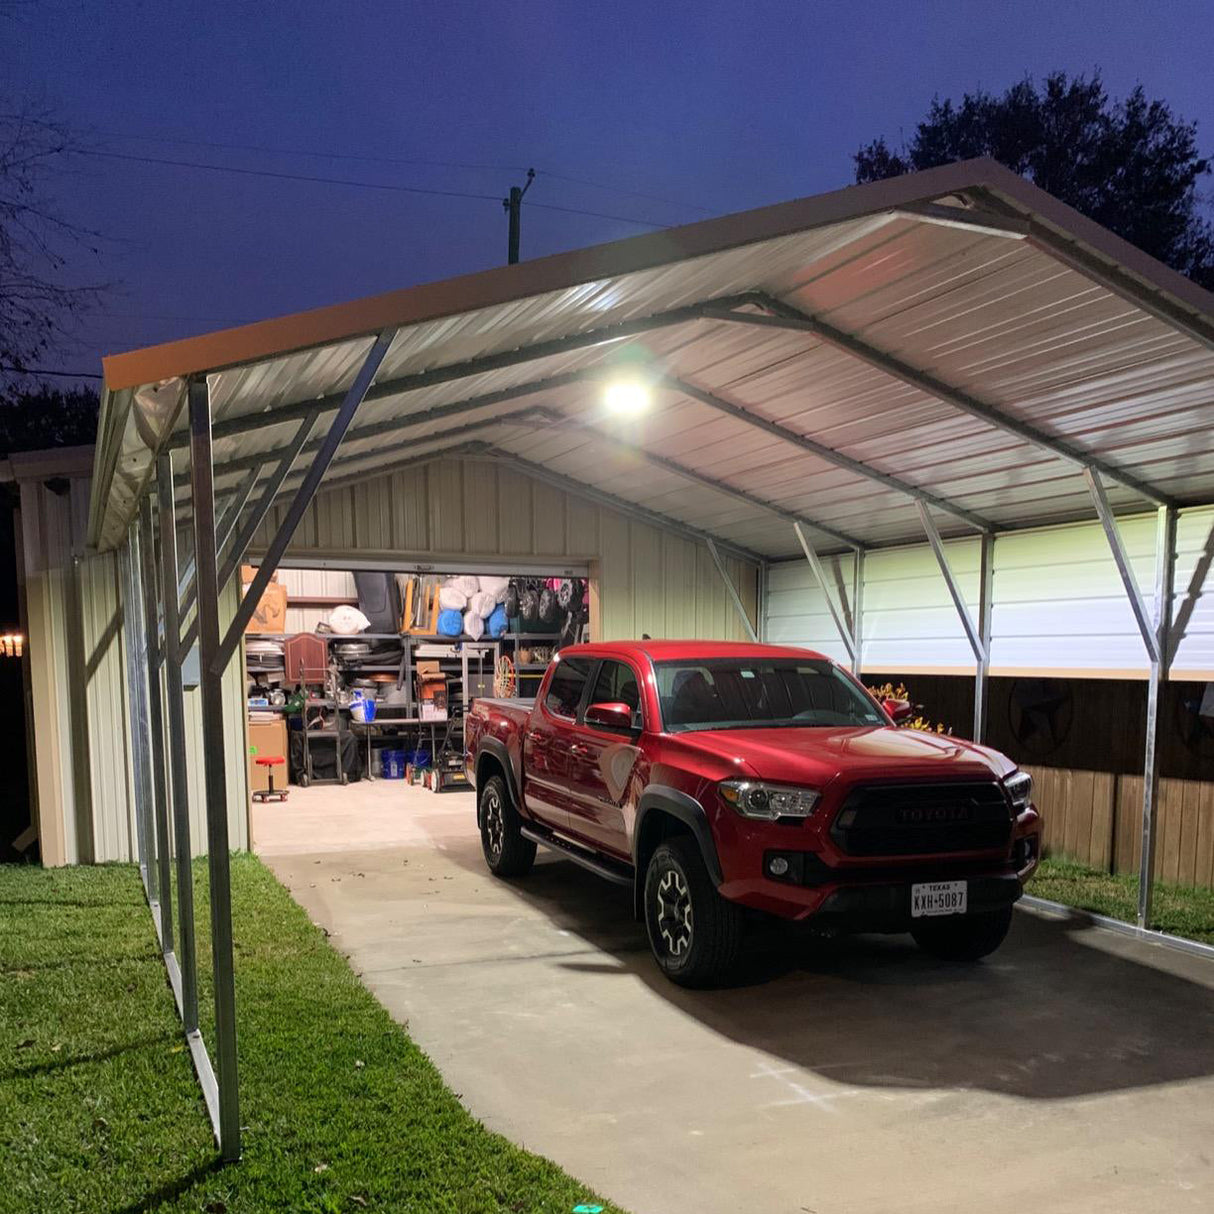 canopy lighting fixtures used in pole barn parking area